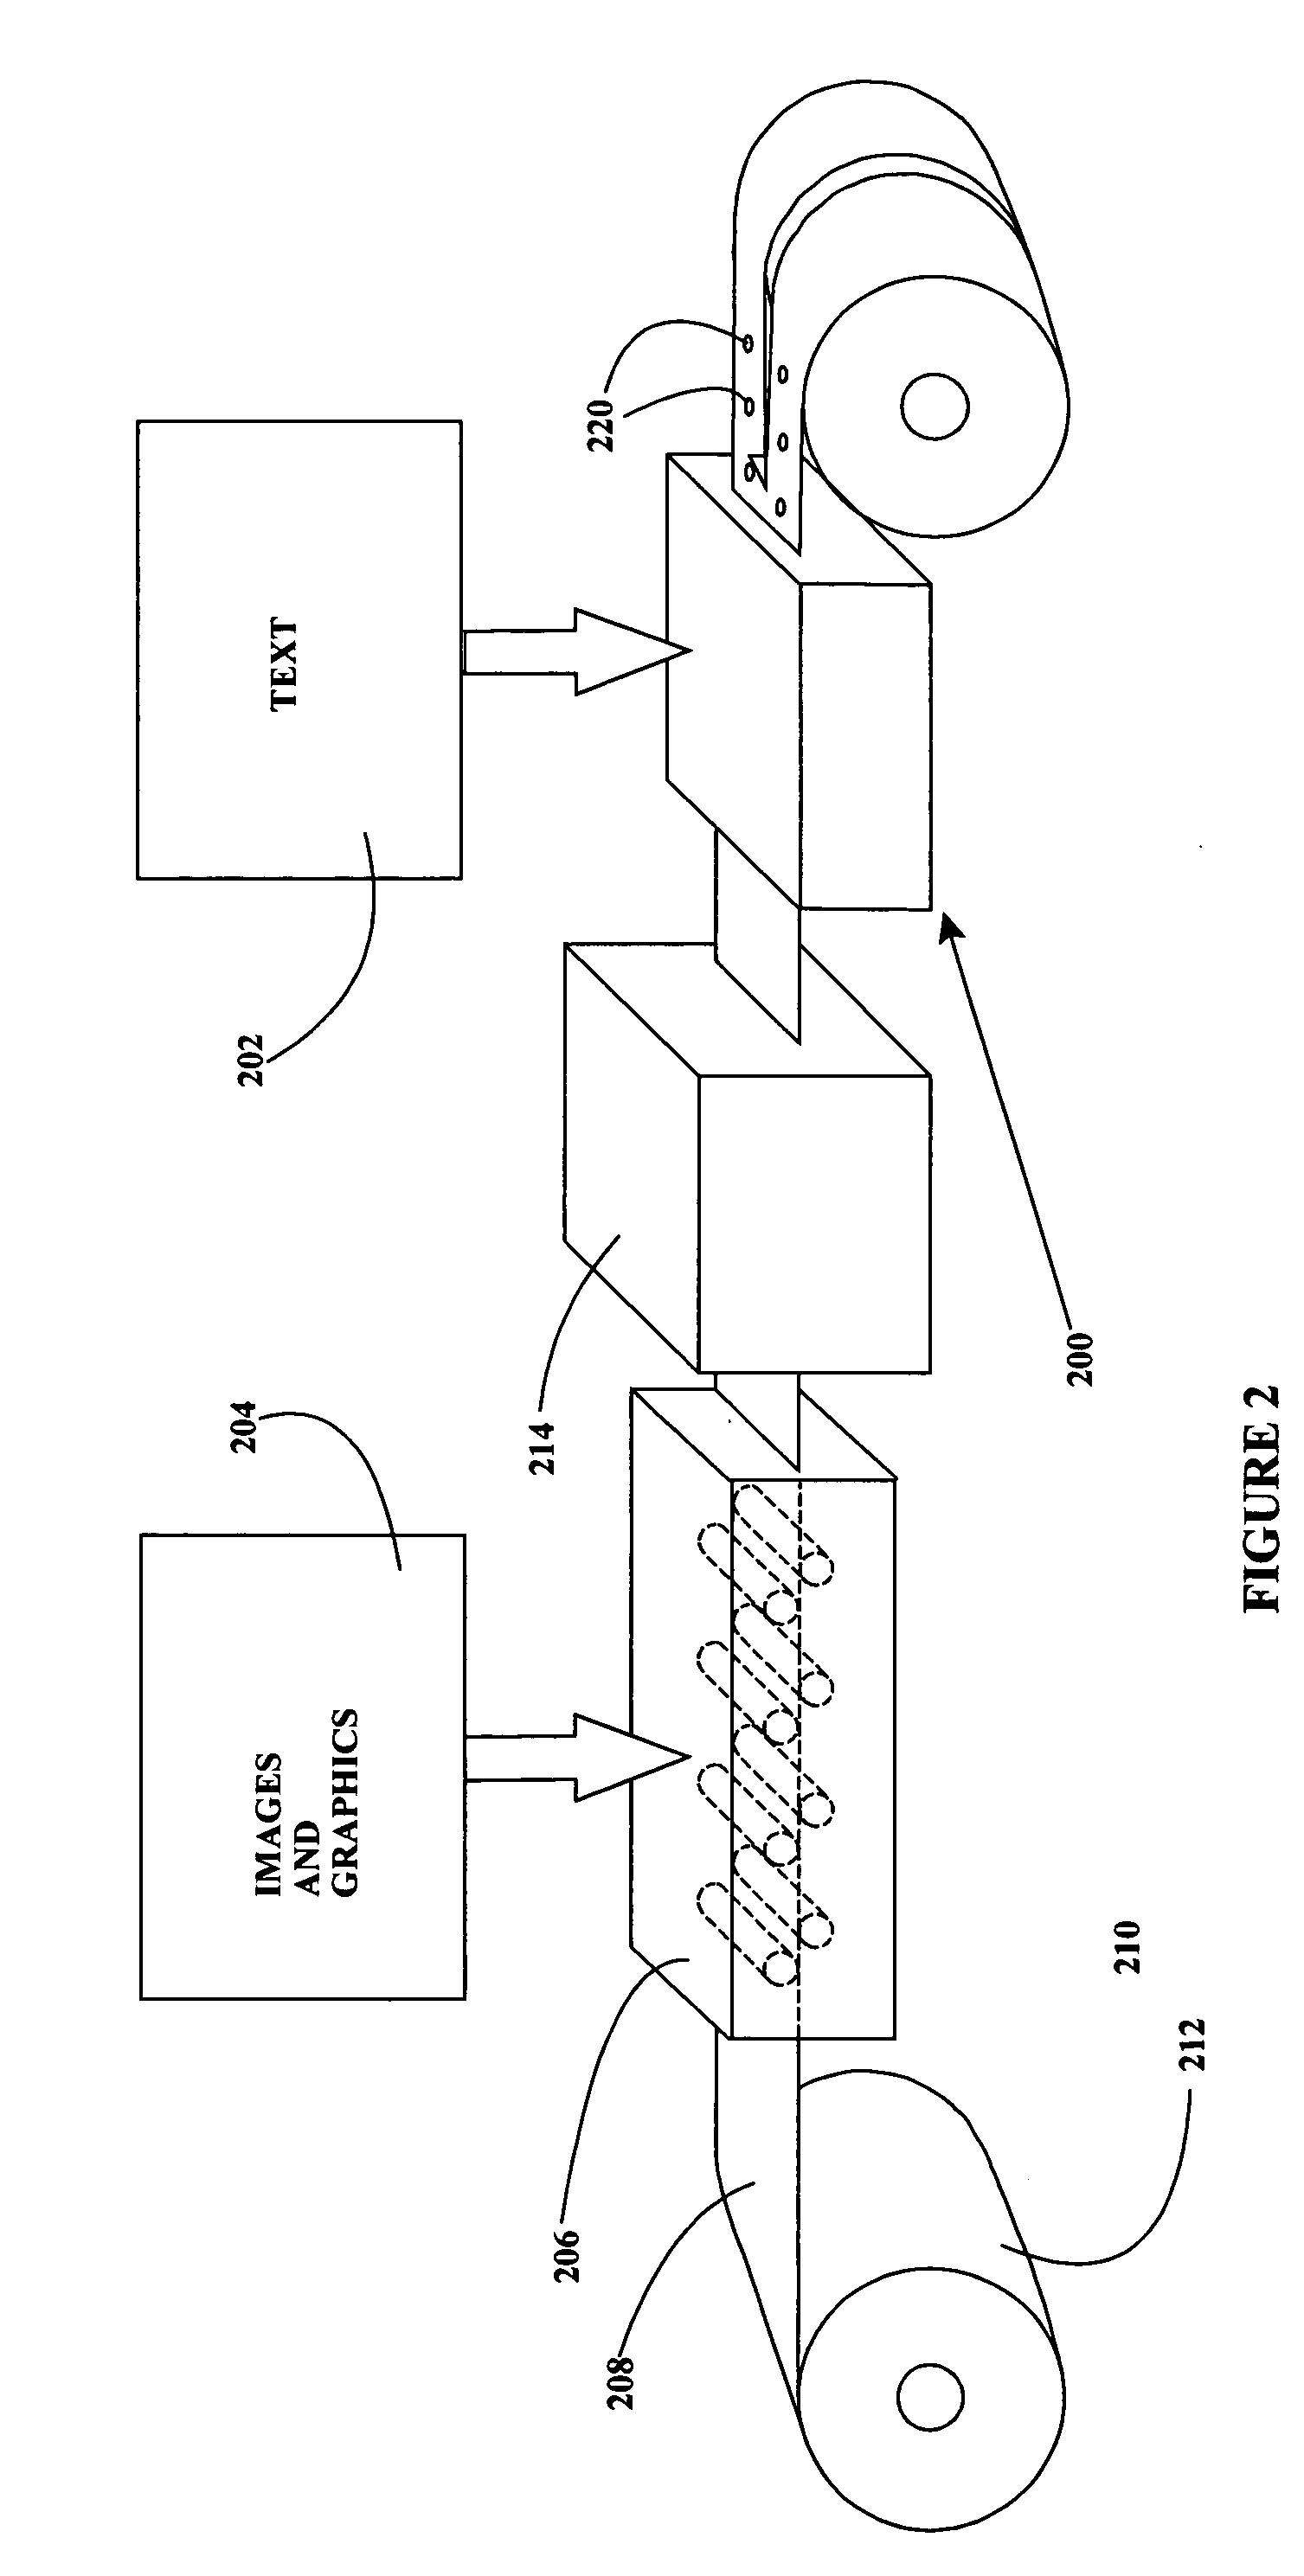 Method for producing targeted promotional information on retail shopping bags